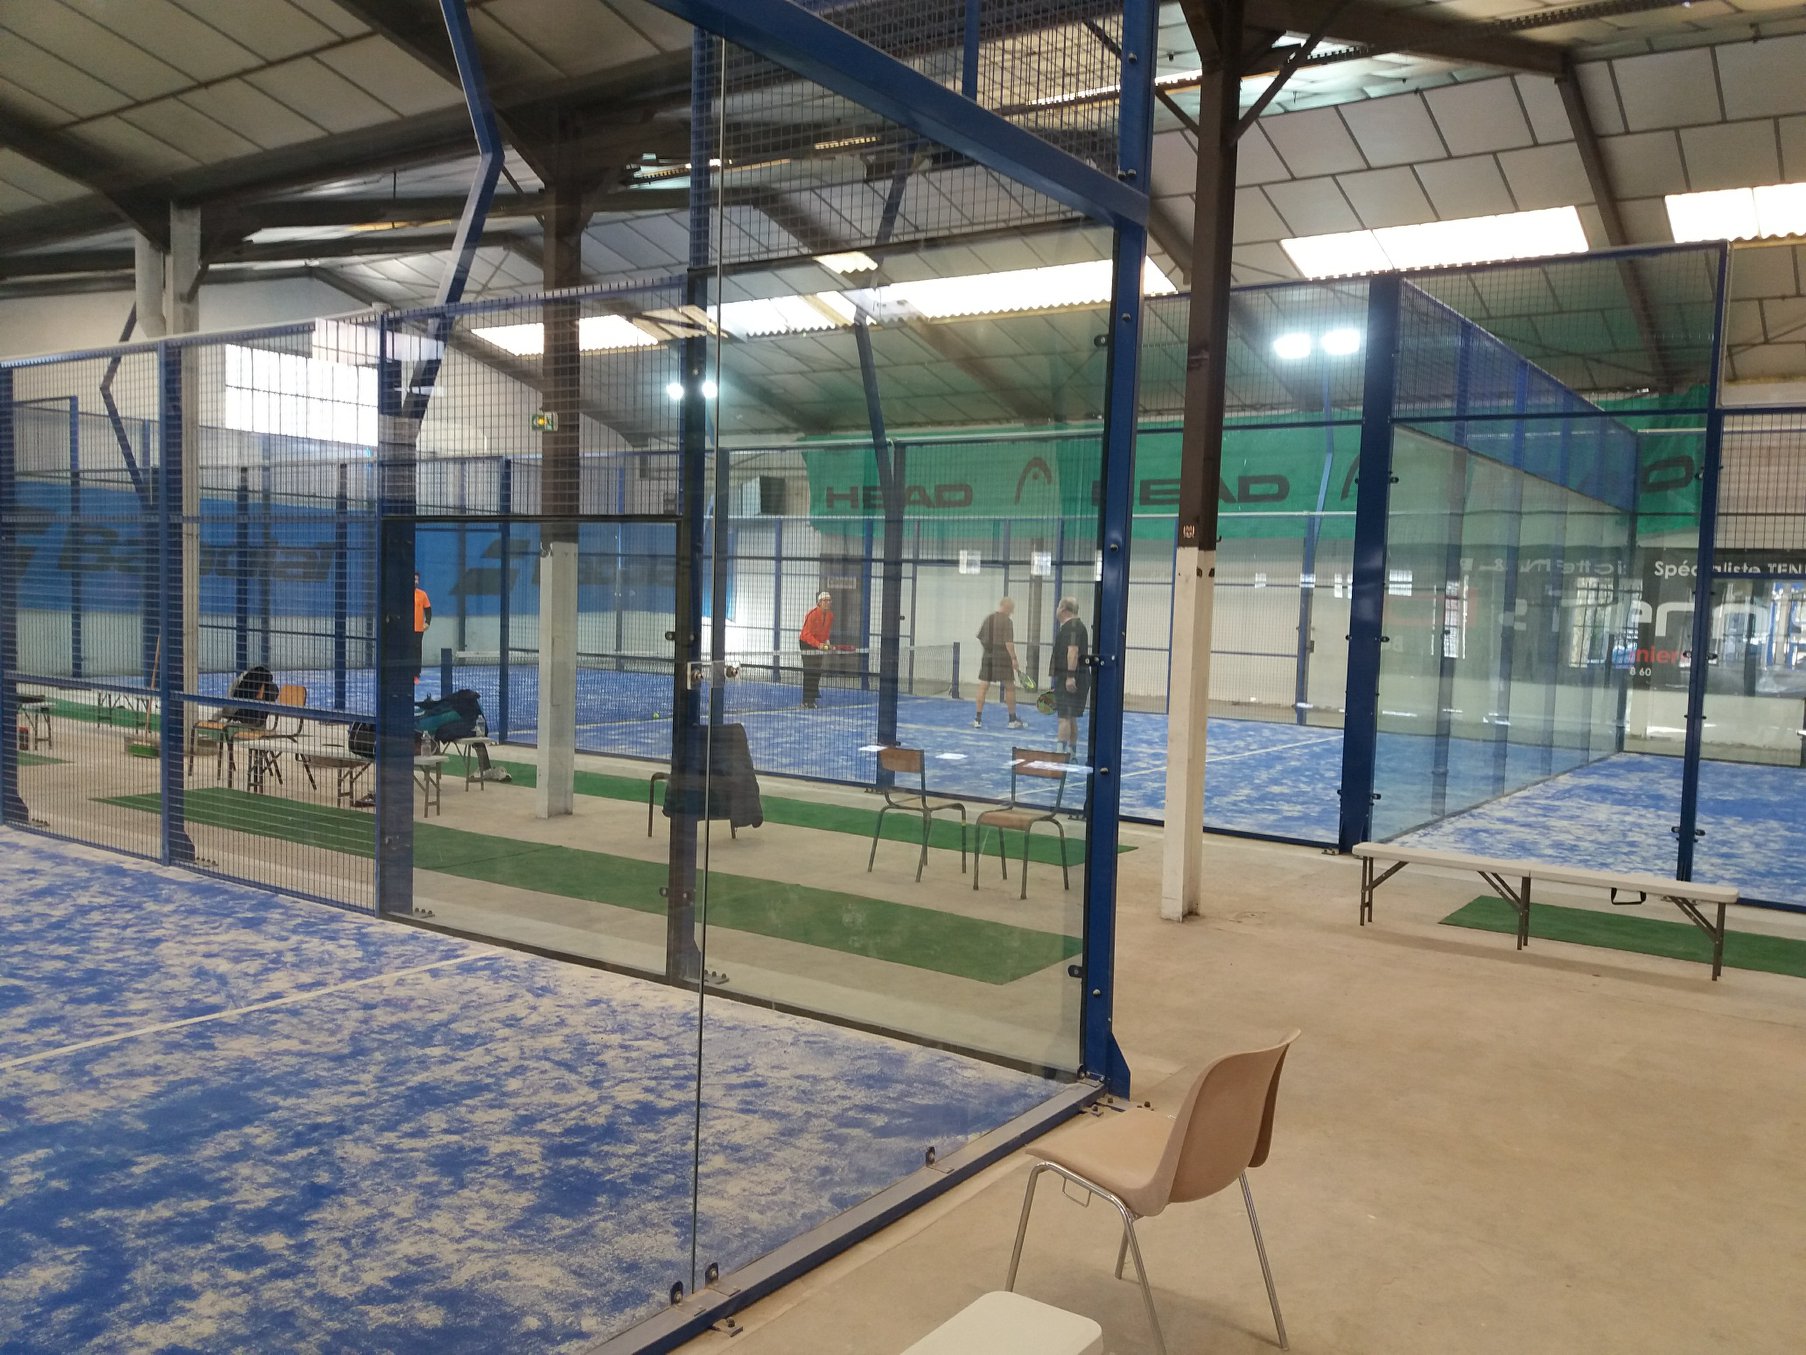 Padel Tolosa: Doors open from April 23 to 29